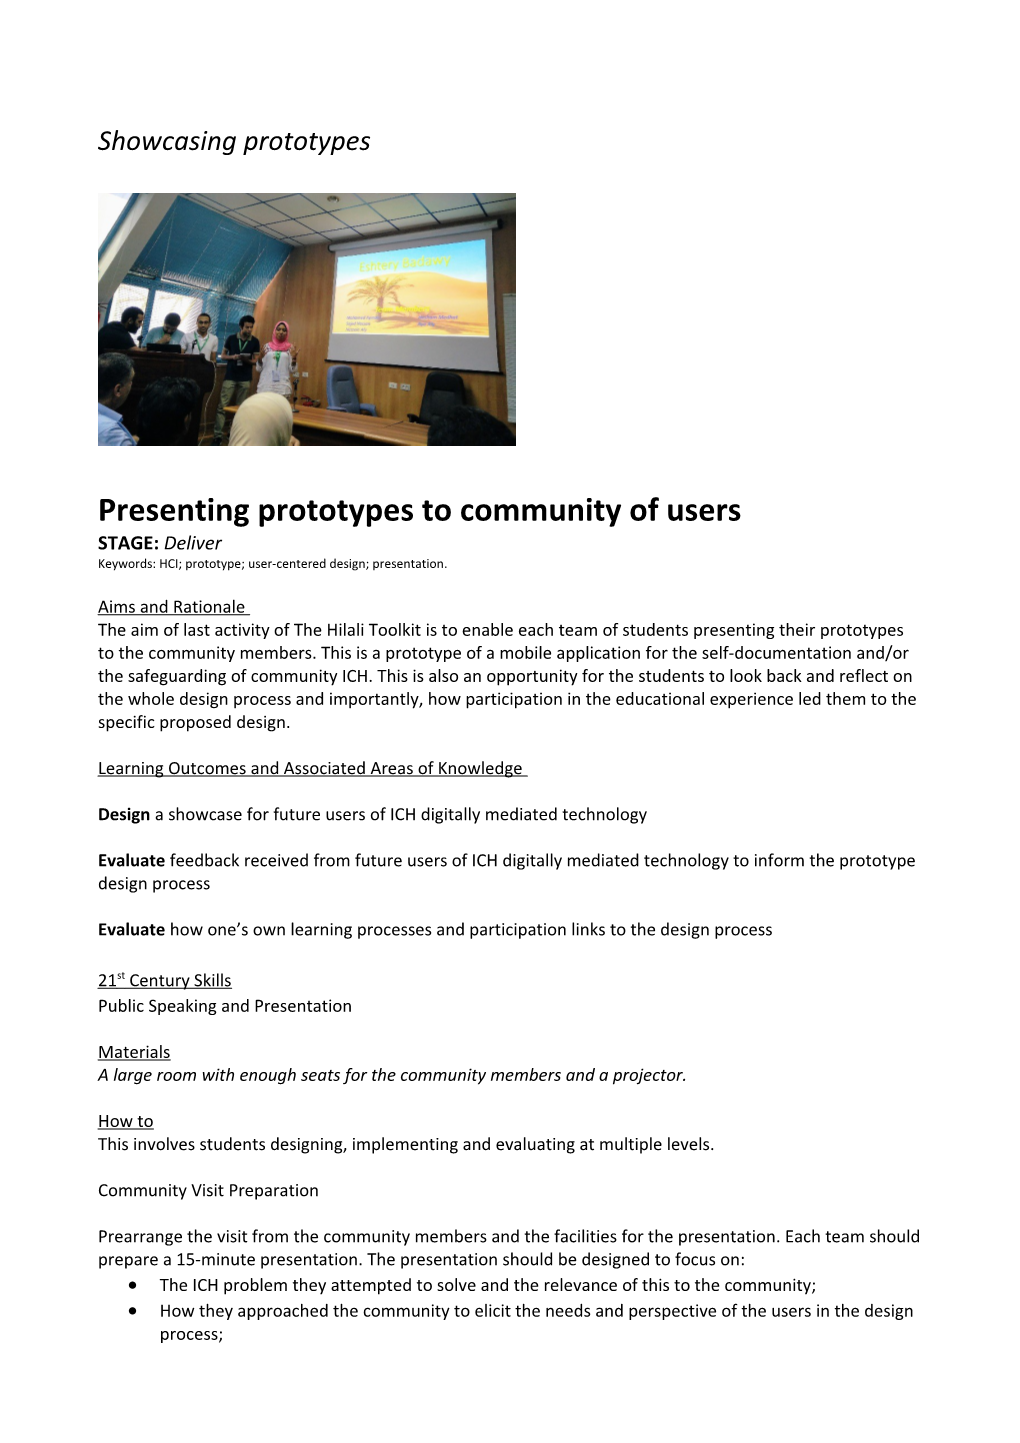 Presenting Prototypes to Community of Users